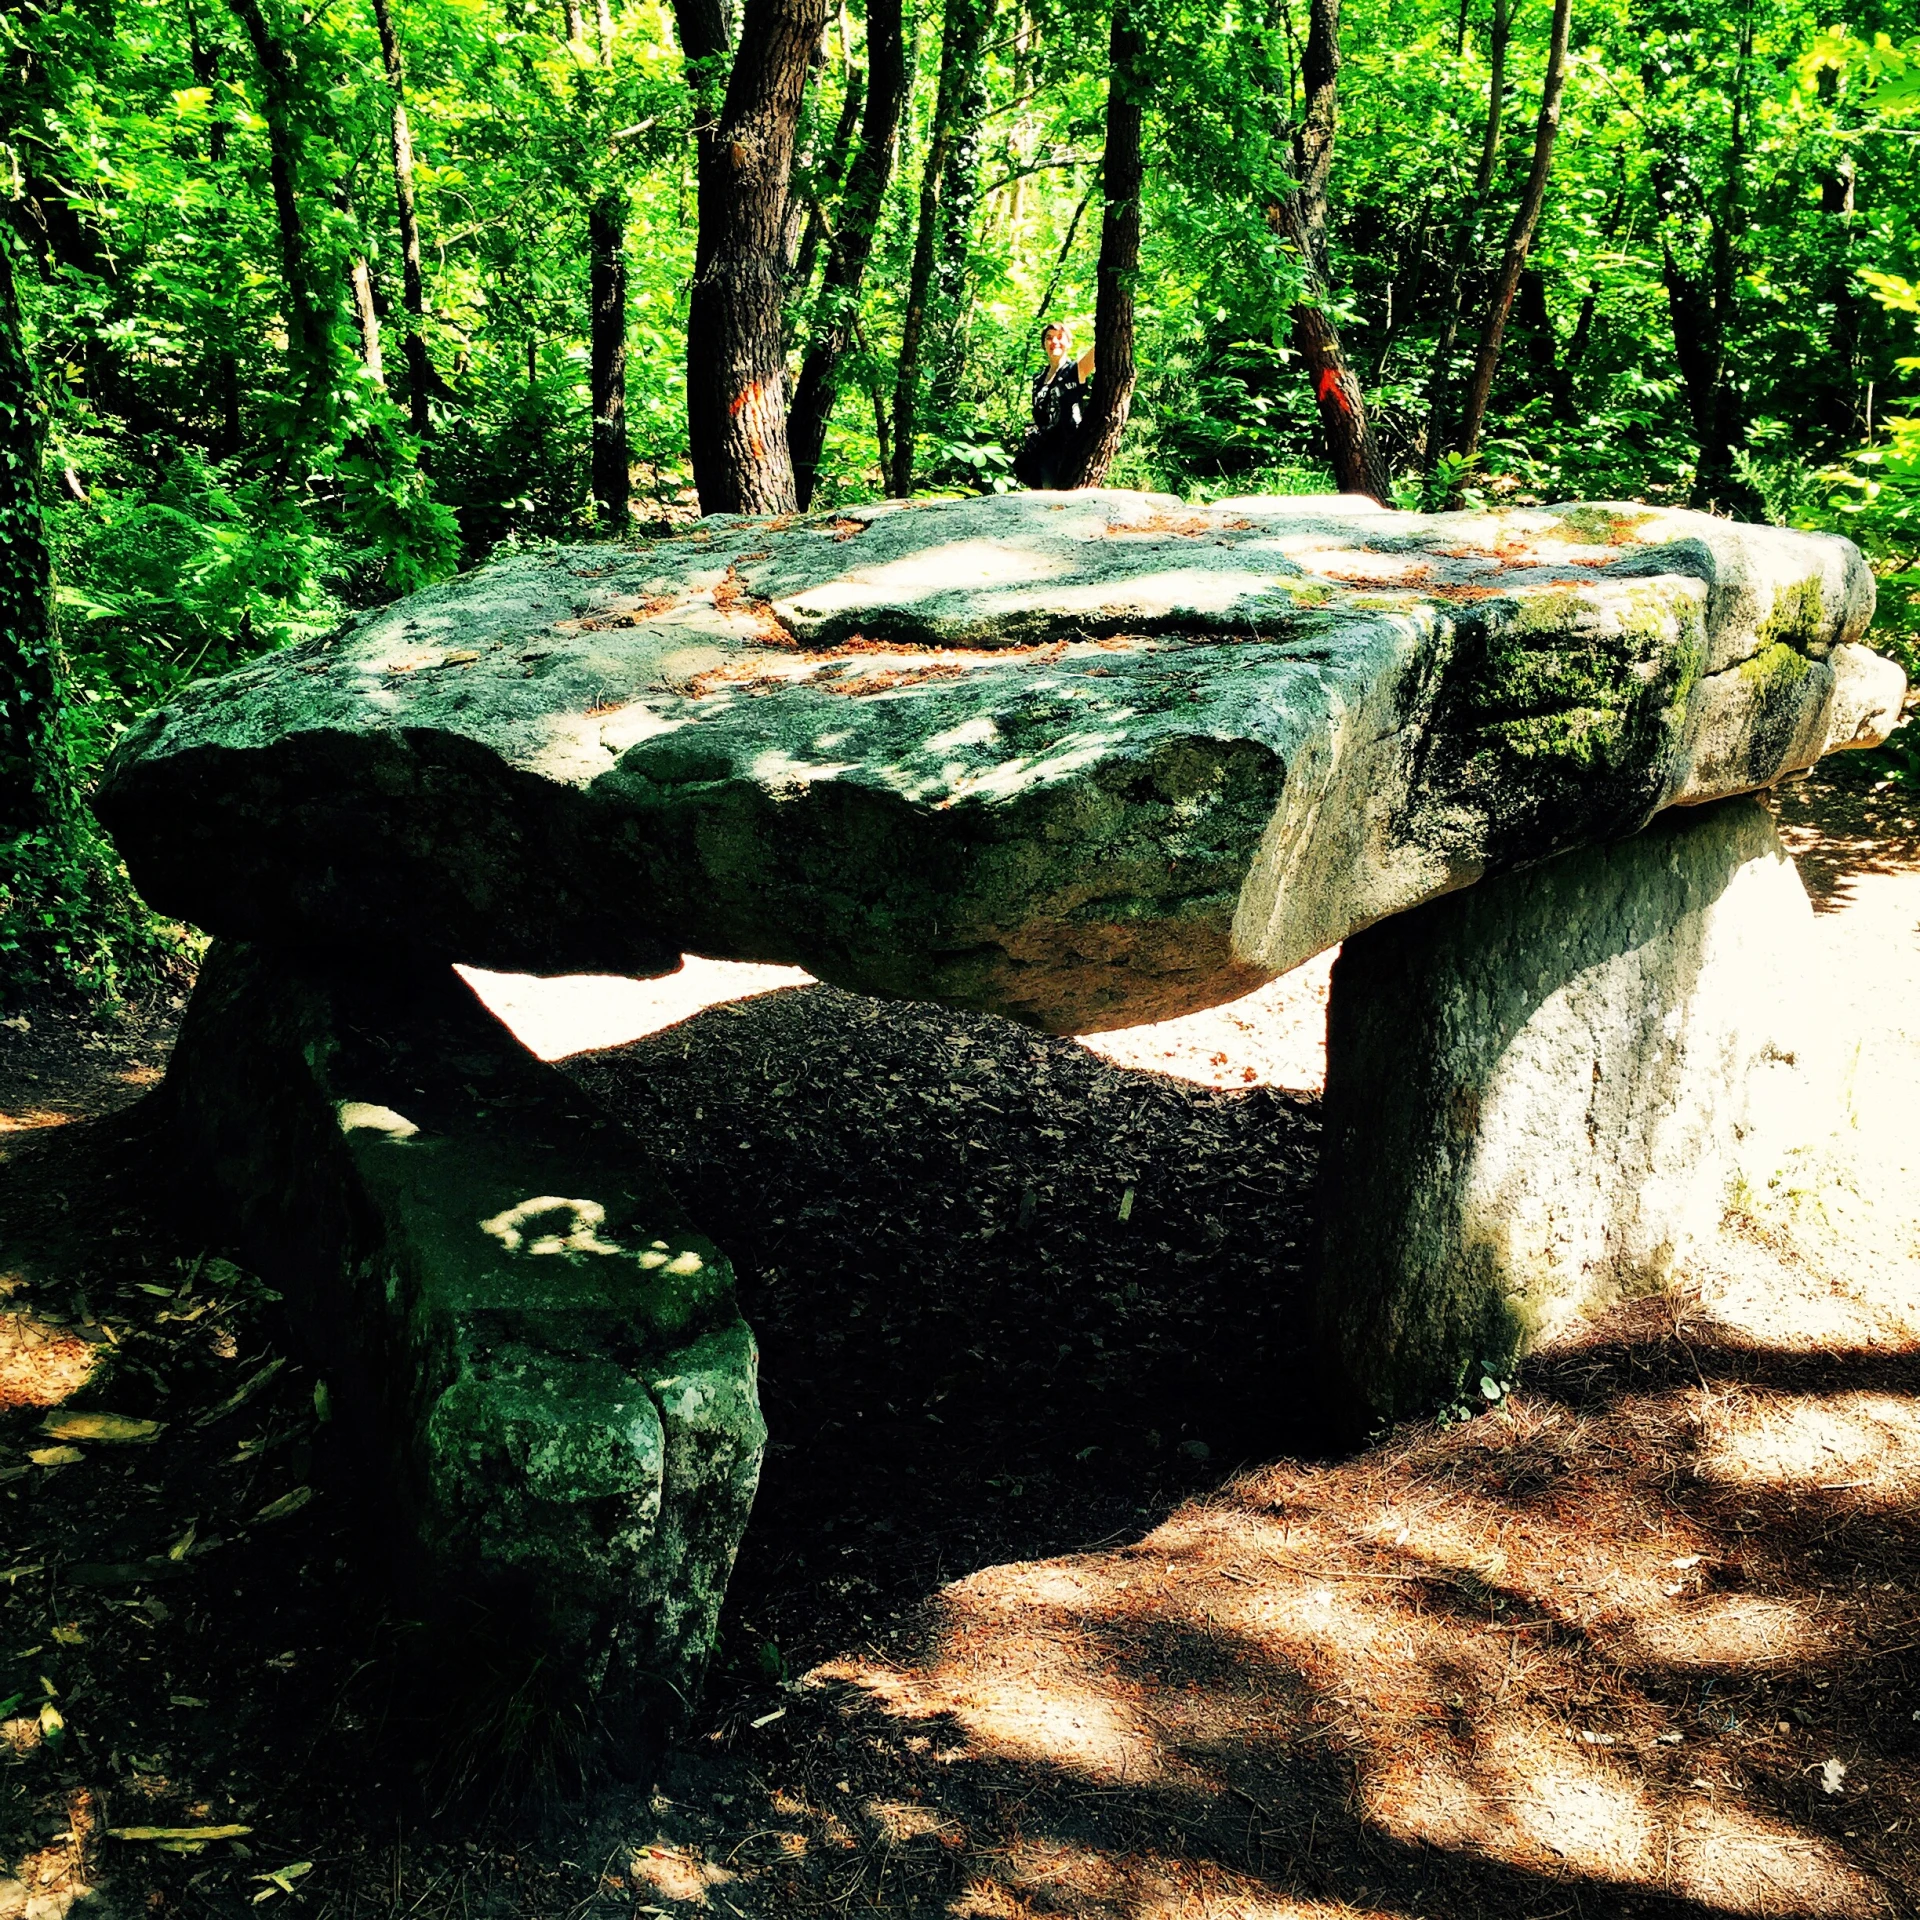 large rock sitting in a shady area near trees